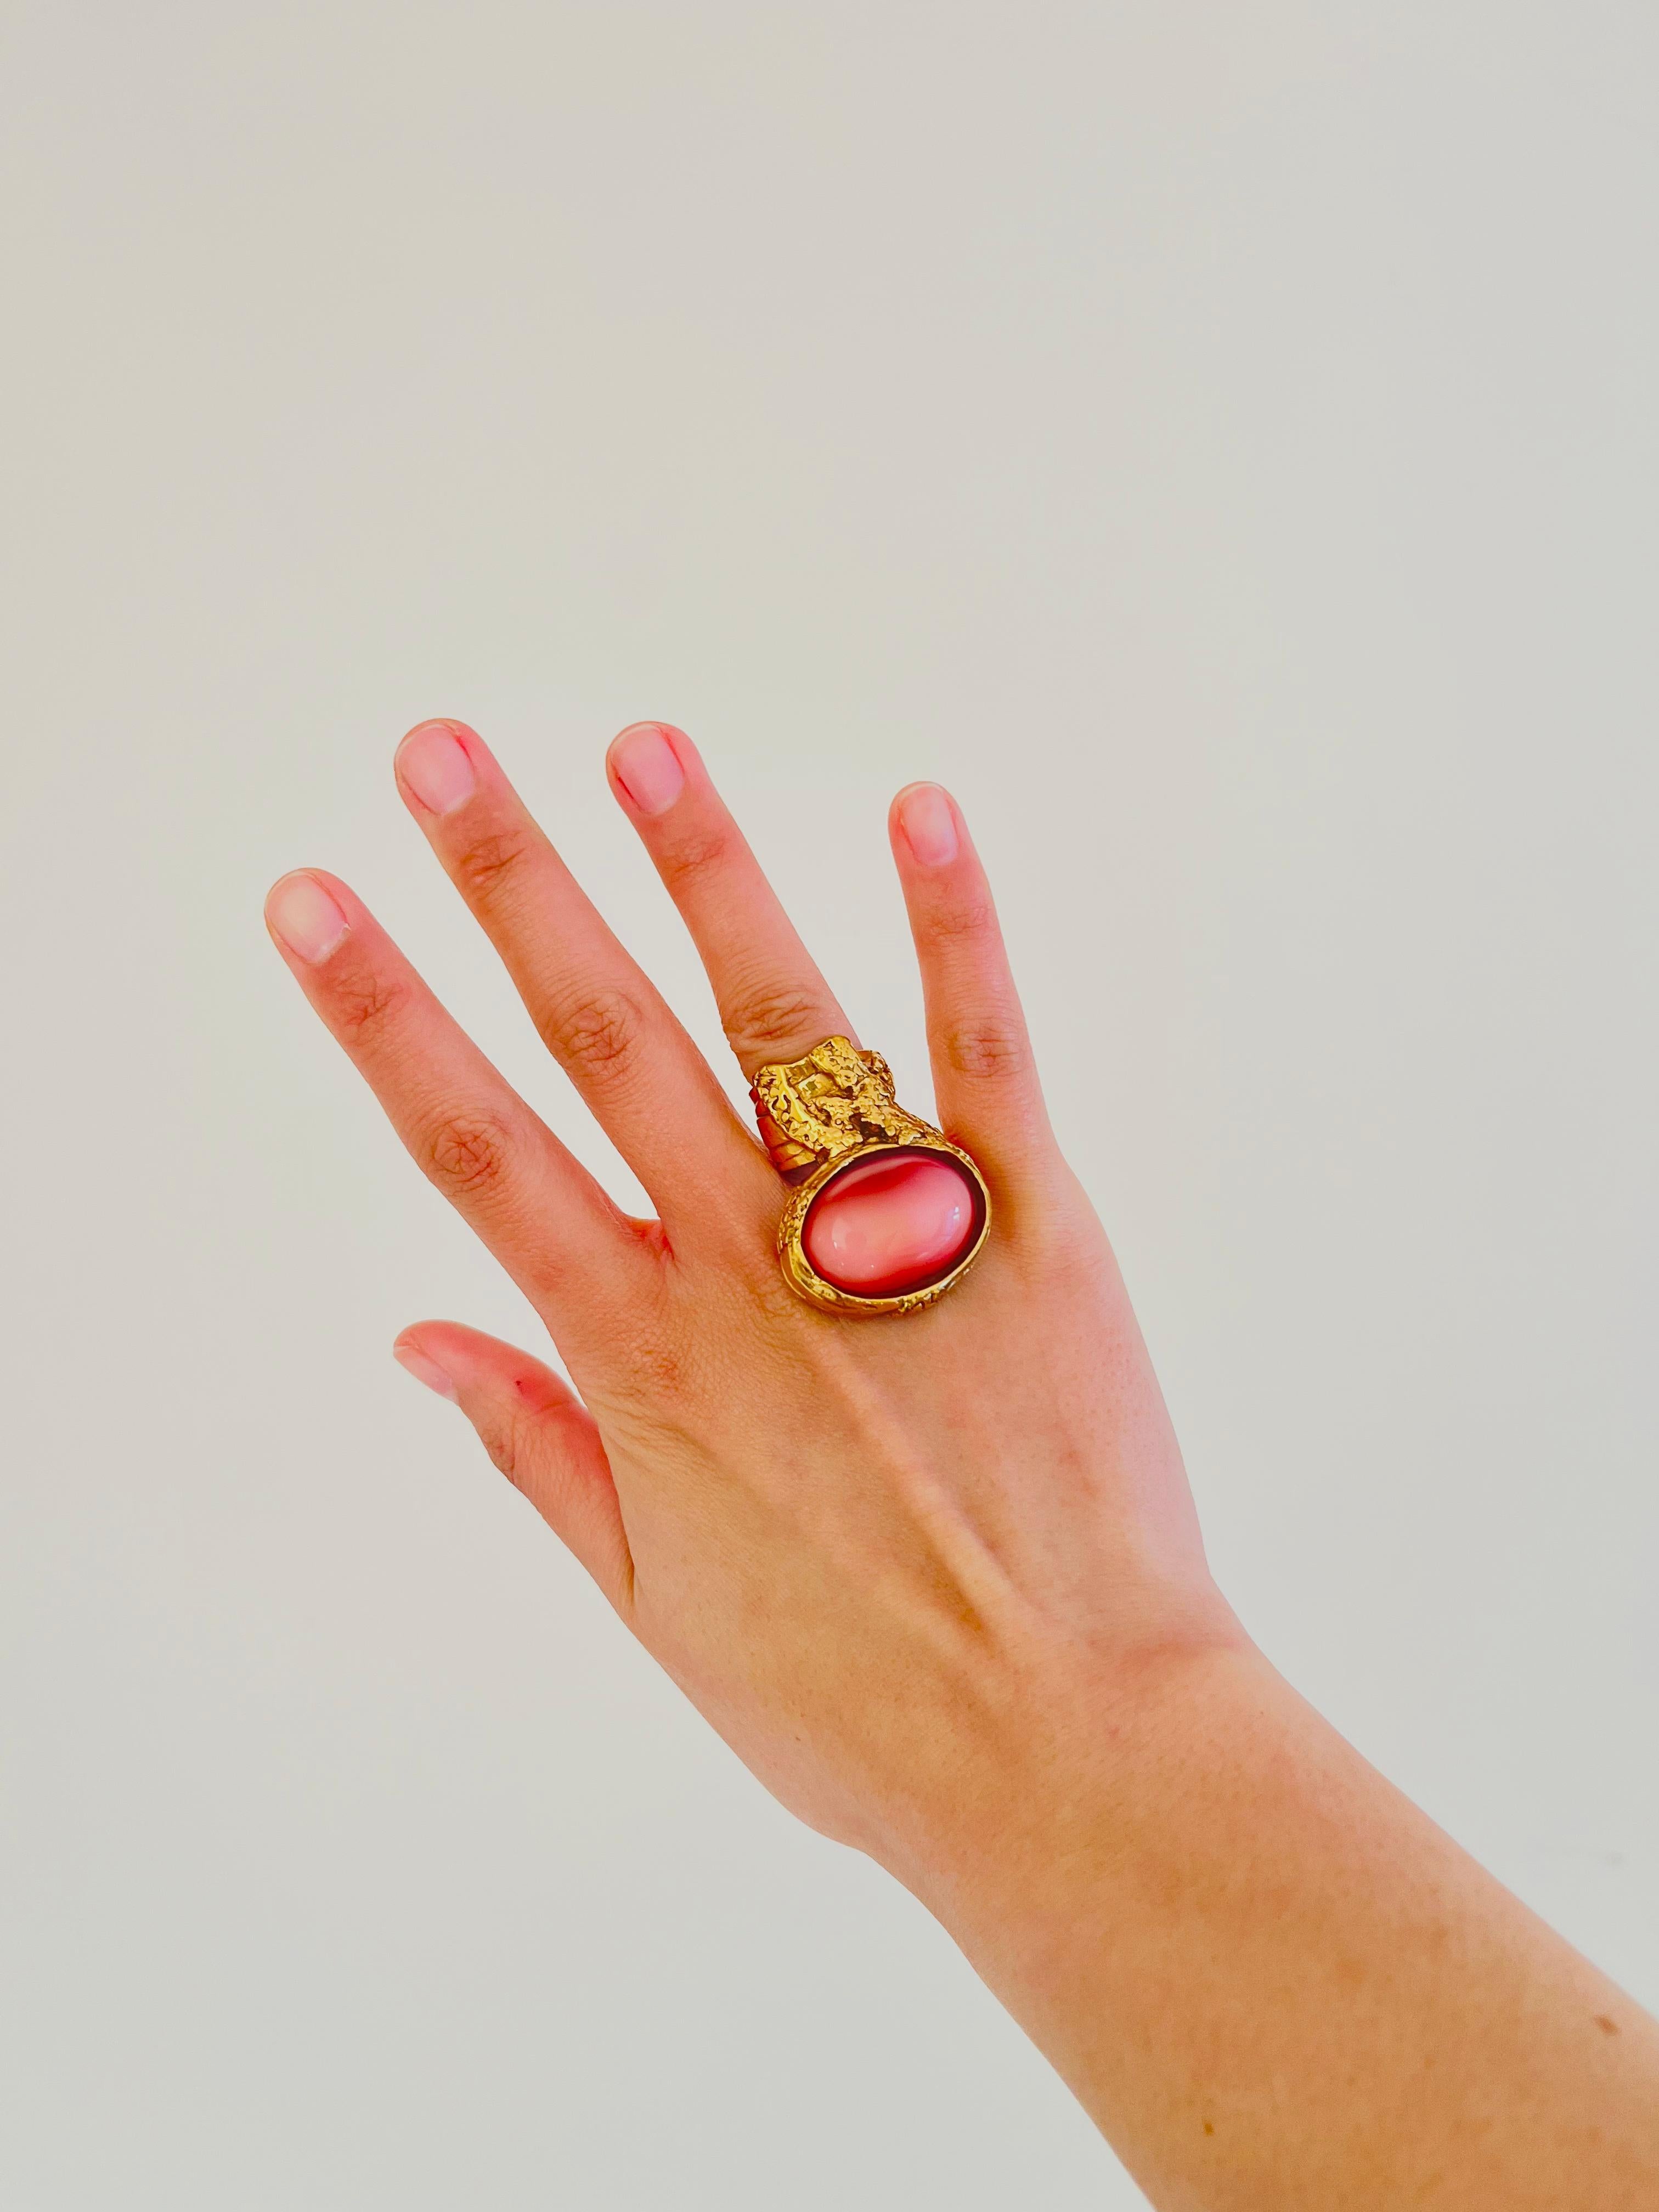 Yves Saint Laurent YSL Arty Clear Pink Statement Chunky Cabochon Gold Ring, US 5 In Excellent Condition For Sale In Wokingham, England